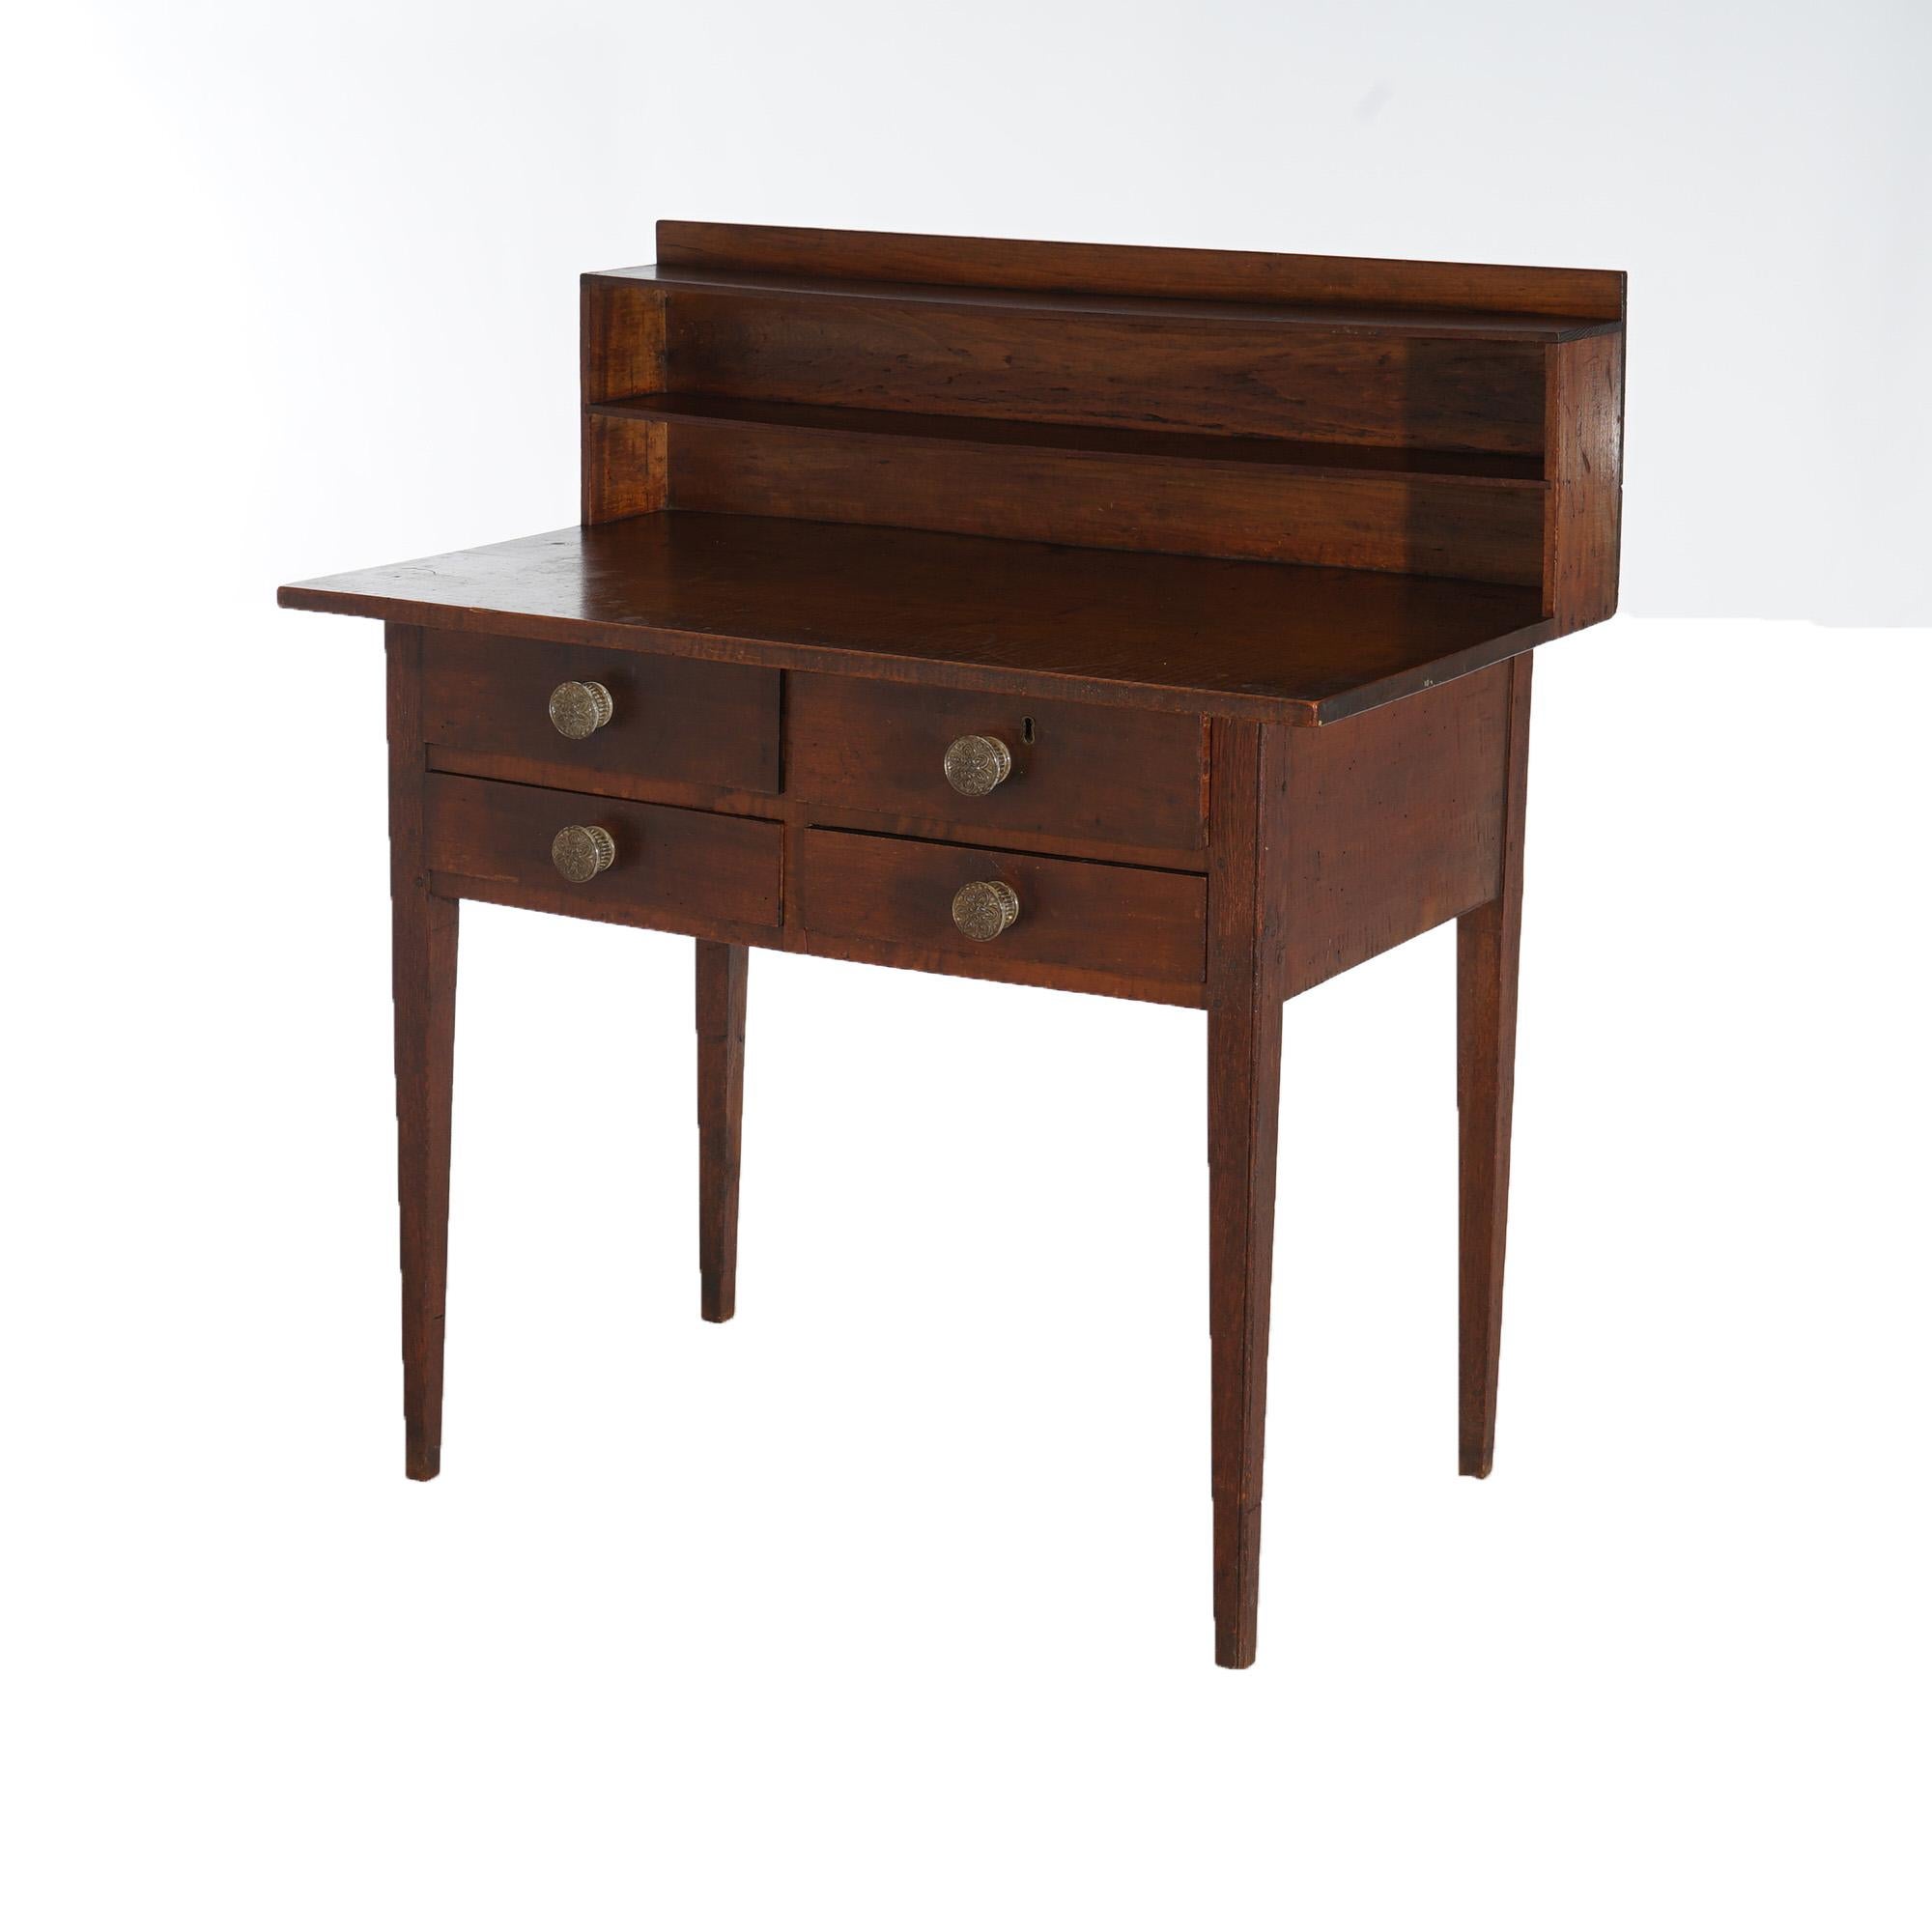 An antique Hepplewhite Shaker school writing desk offers tiger maple and cherry construction with upper storage compartments, four drawers and raised on square and tapered legs; provenance card as photographed; c1830

Measures - 39.75